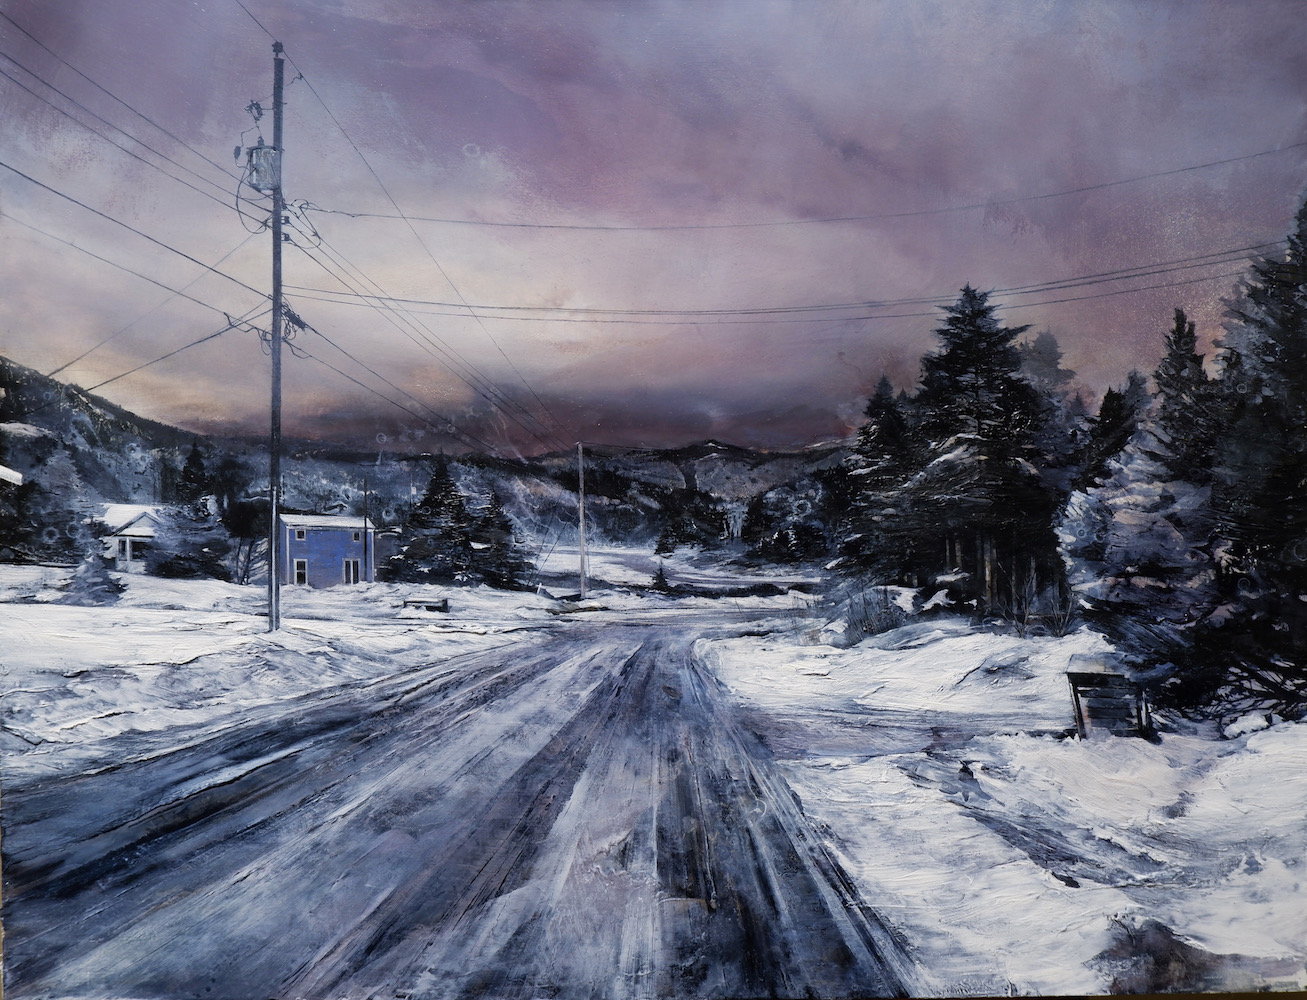 Mark Thompson, To Which Everything Returns, 2021, oil on panel, 24 x 32 inches, $5500.